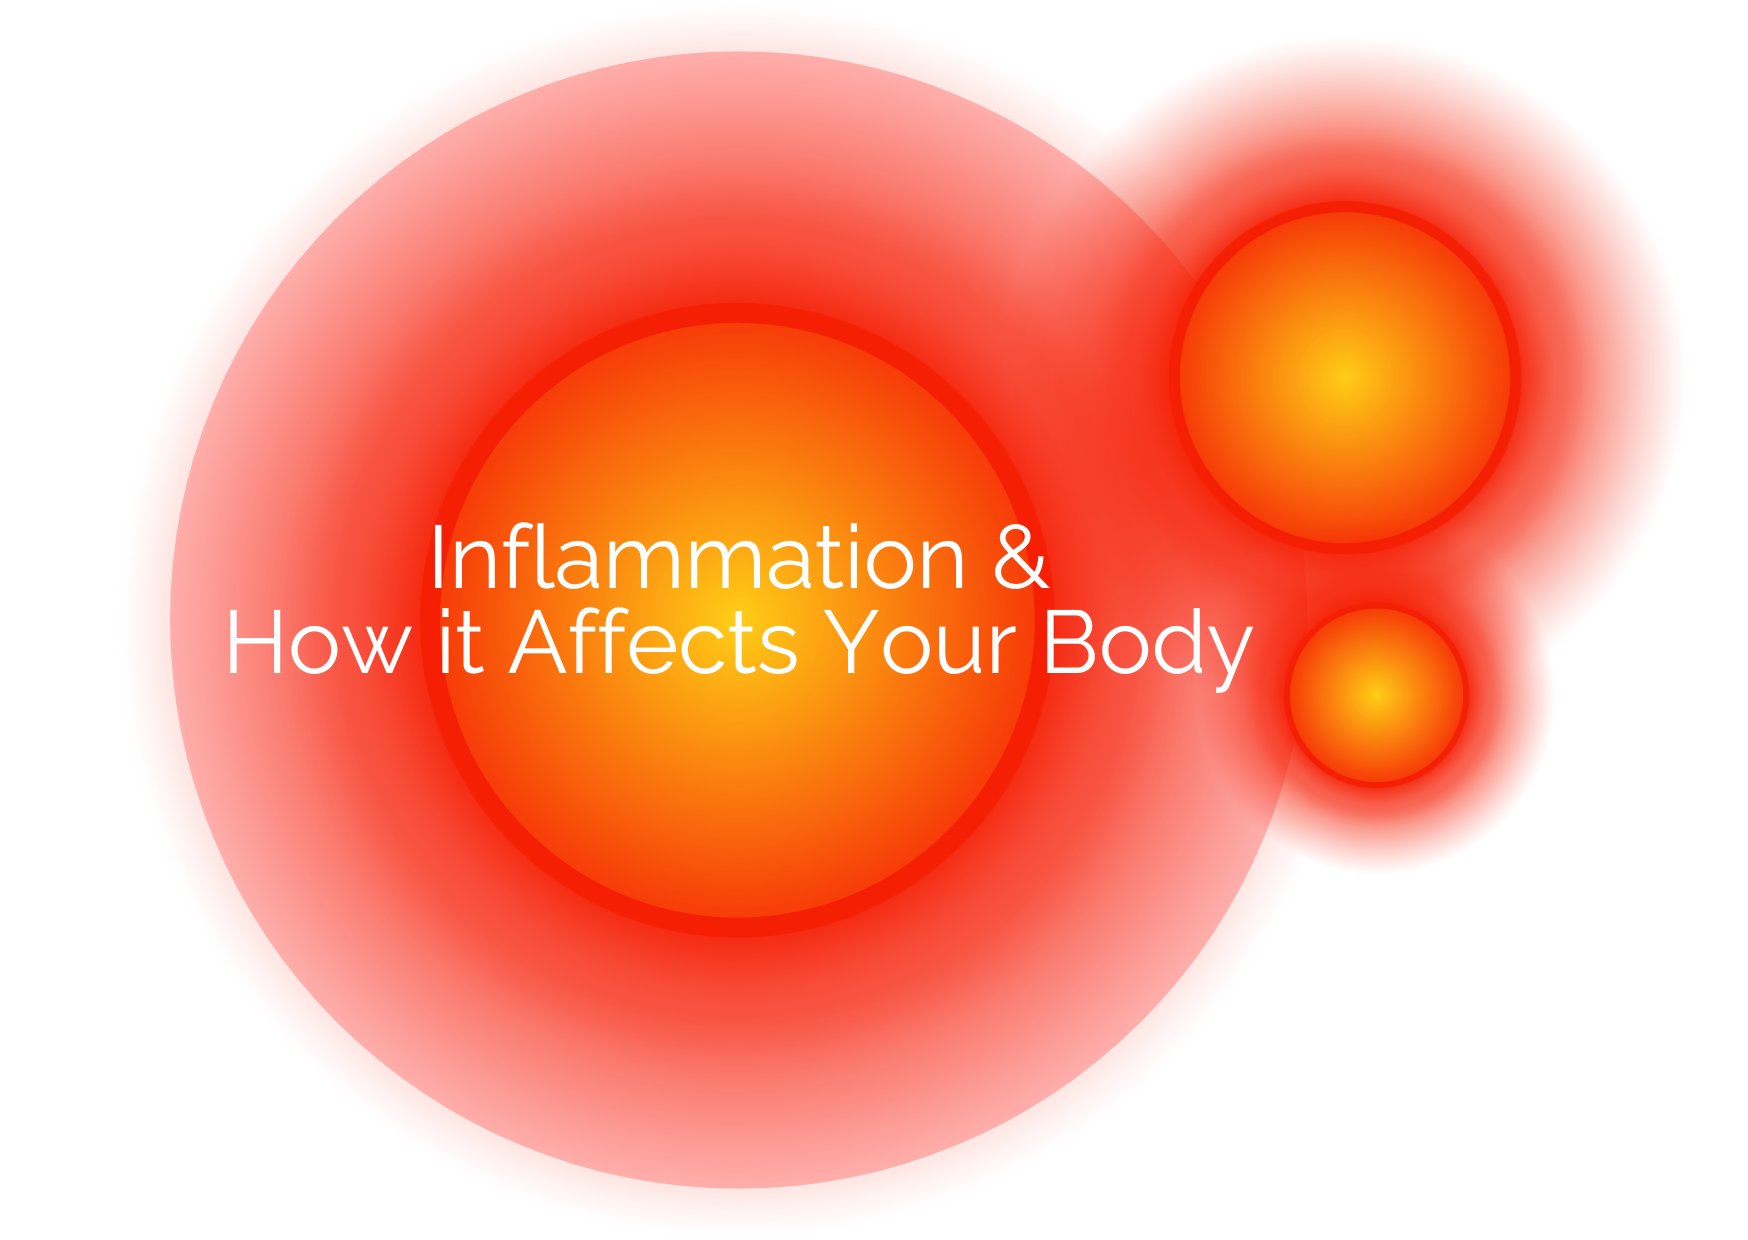 Inflammation & Your Body